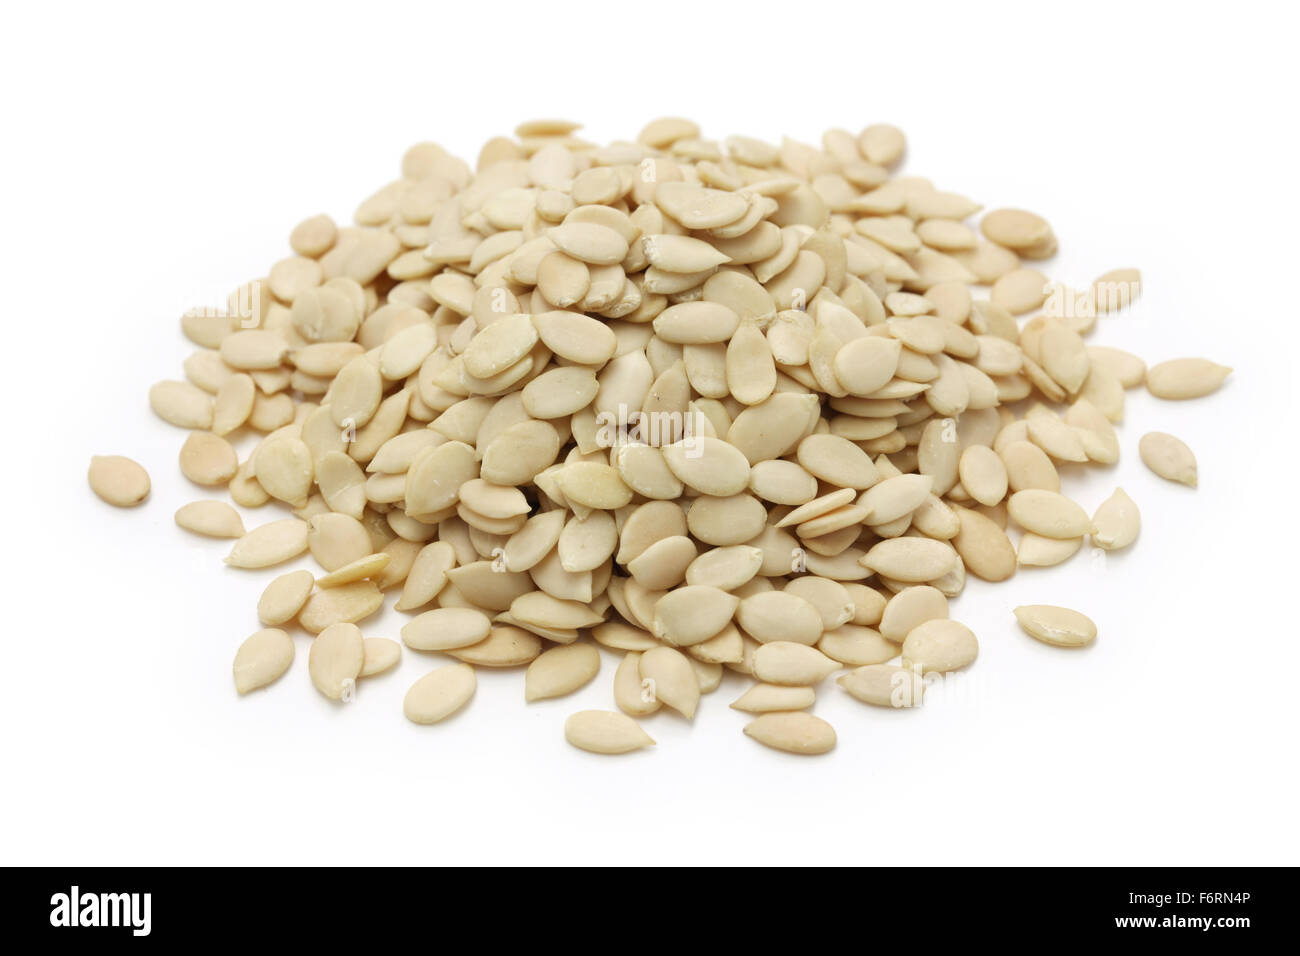 egusi seeds without shells, african watermelon seeds, egusi soup ingredient Stock Photo